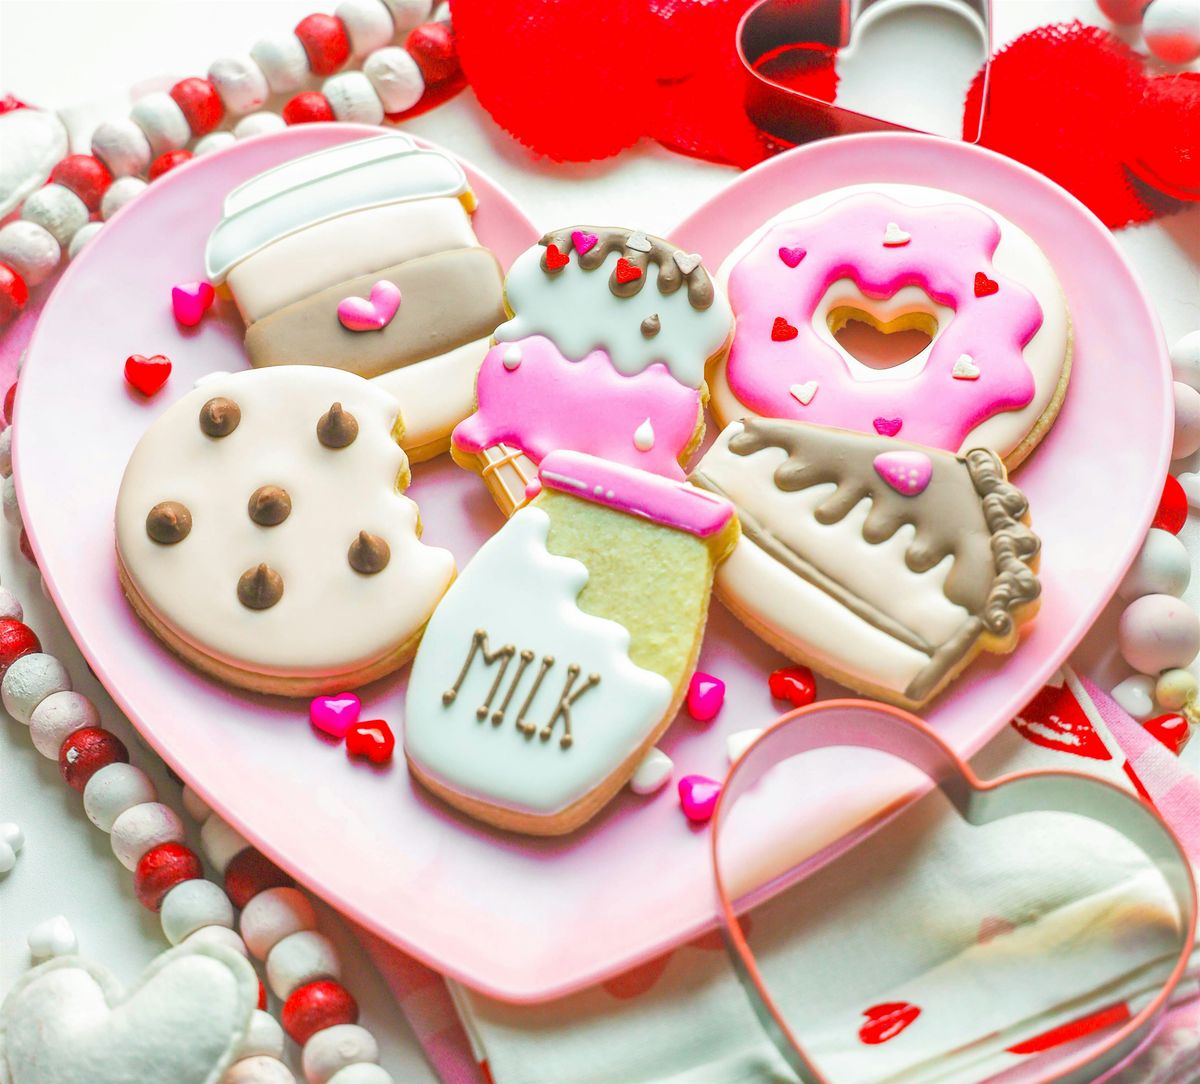 July 12th 6PM-8PM We Go Together Like Milk&Cookies: Cookie Decorating Class